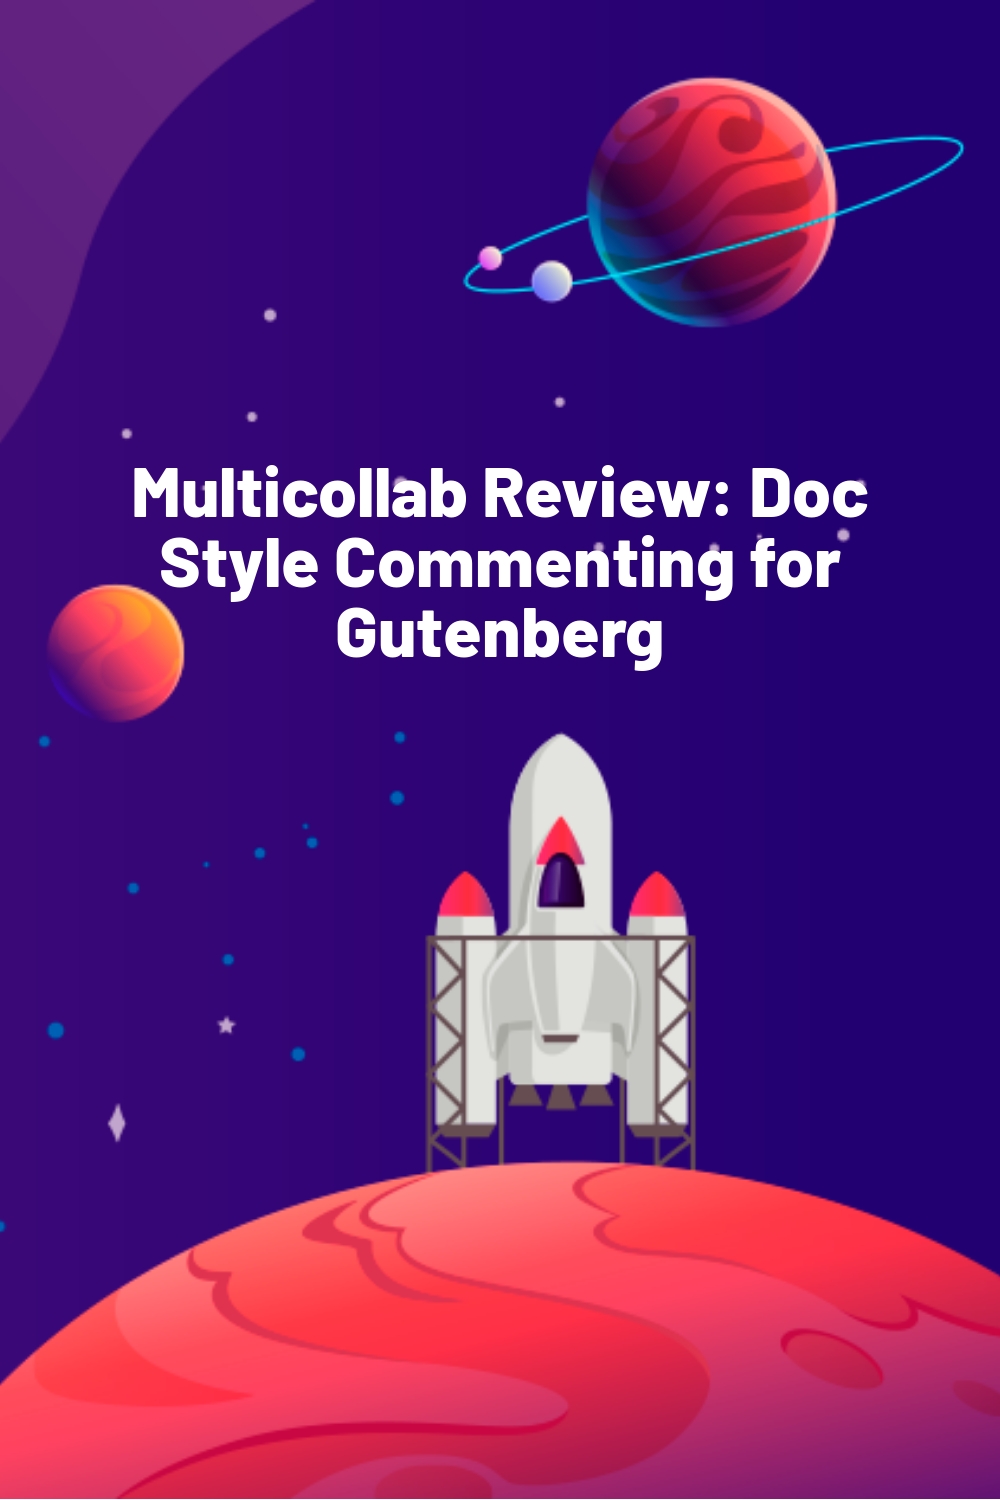 Multicollab Review: Doc Style Commenting for Gutenberg